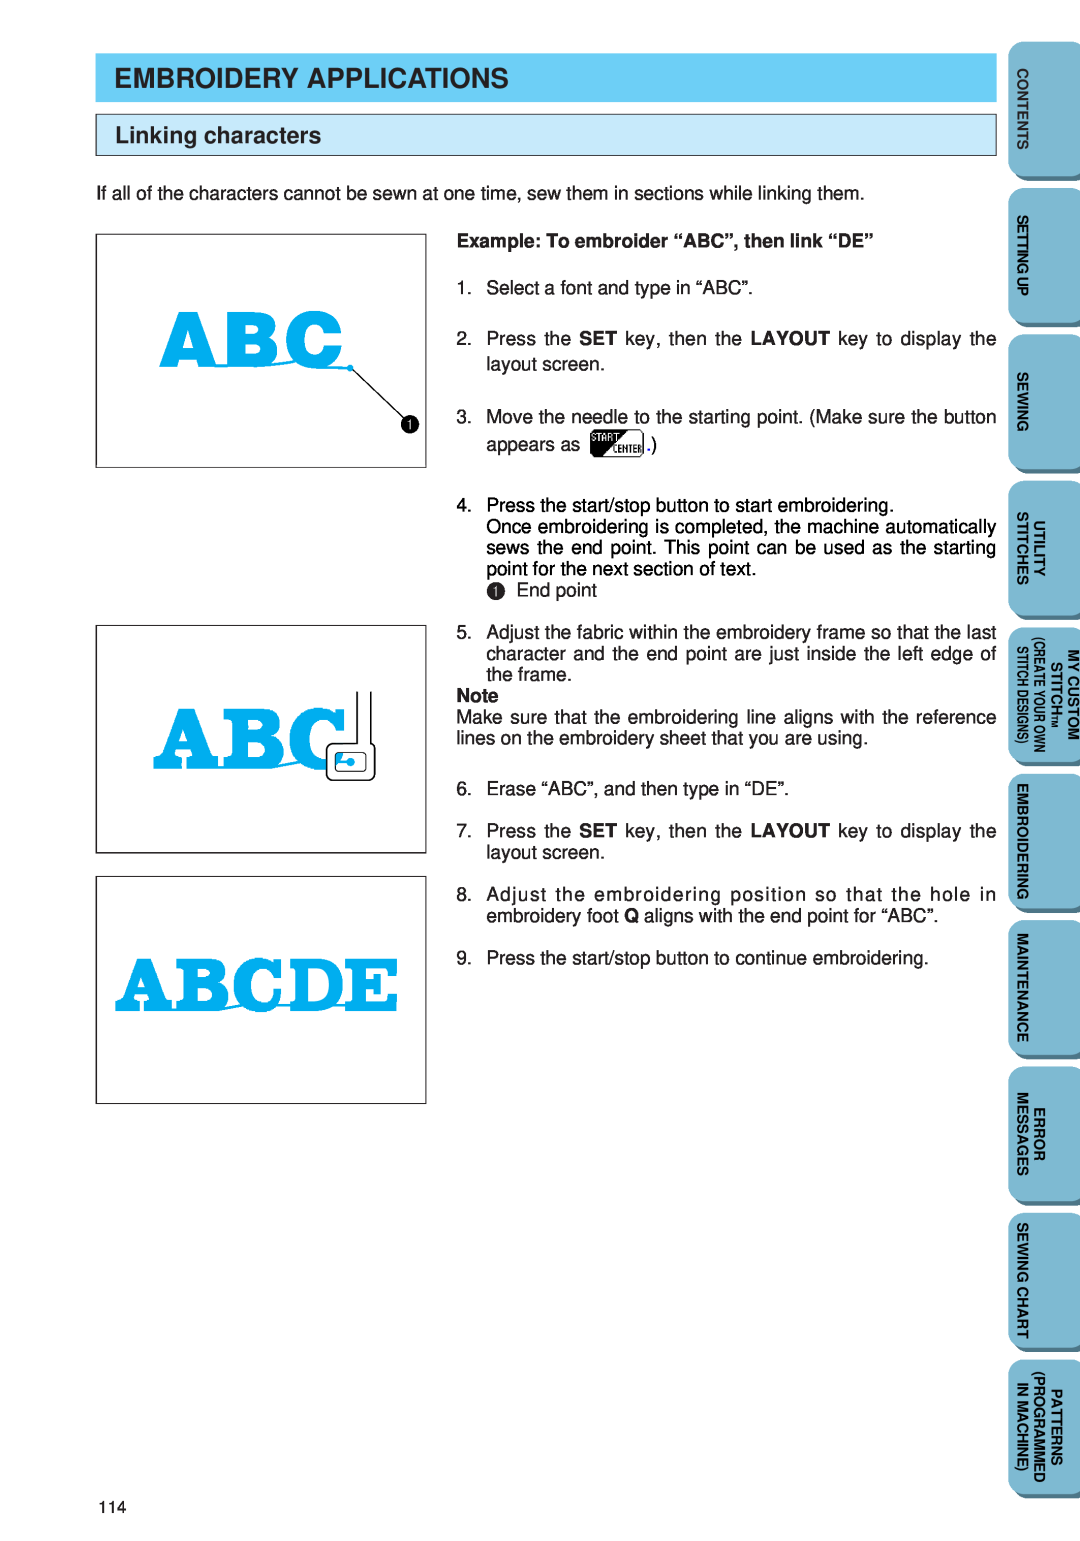 Brother PC 6500 operation manual Embroidery Applications, Linking characters, Example To embroider “ABC”, then link “DE” 